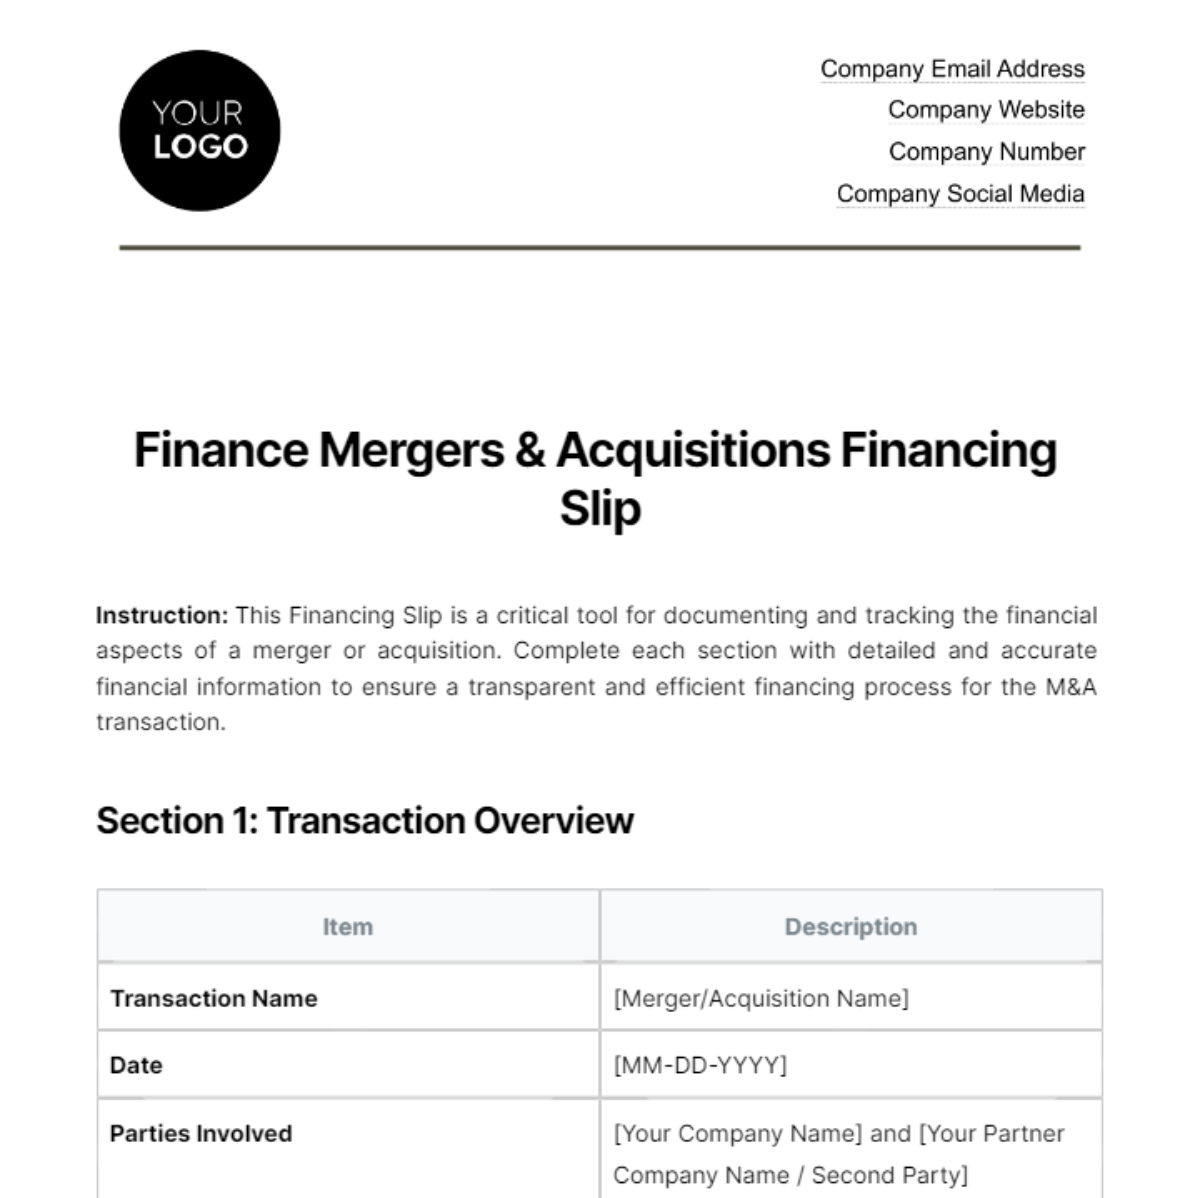 Finance Mergers & Acquisitions Financing Slip Template